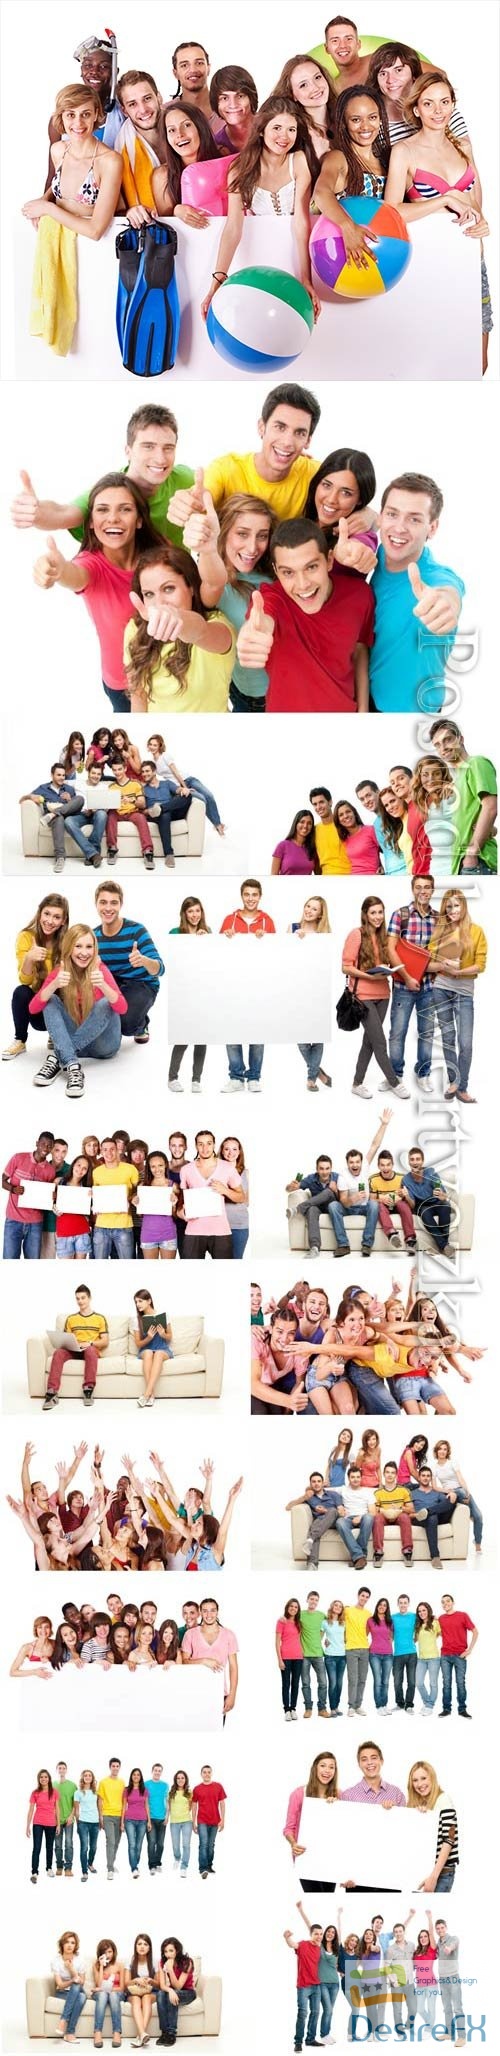 Cheerful group of people stock photo